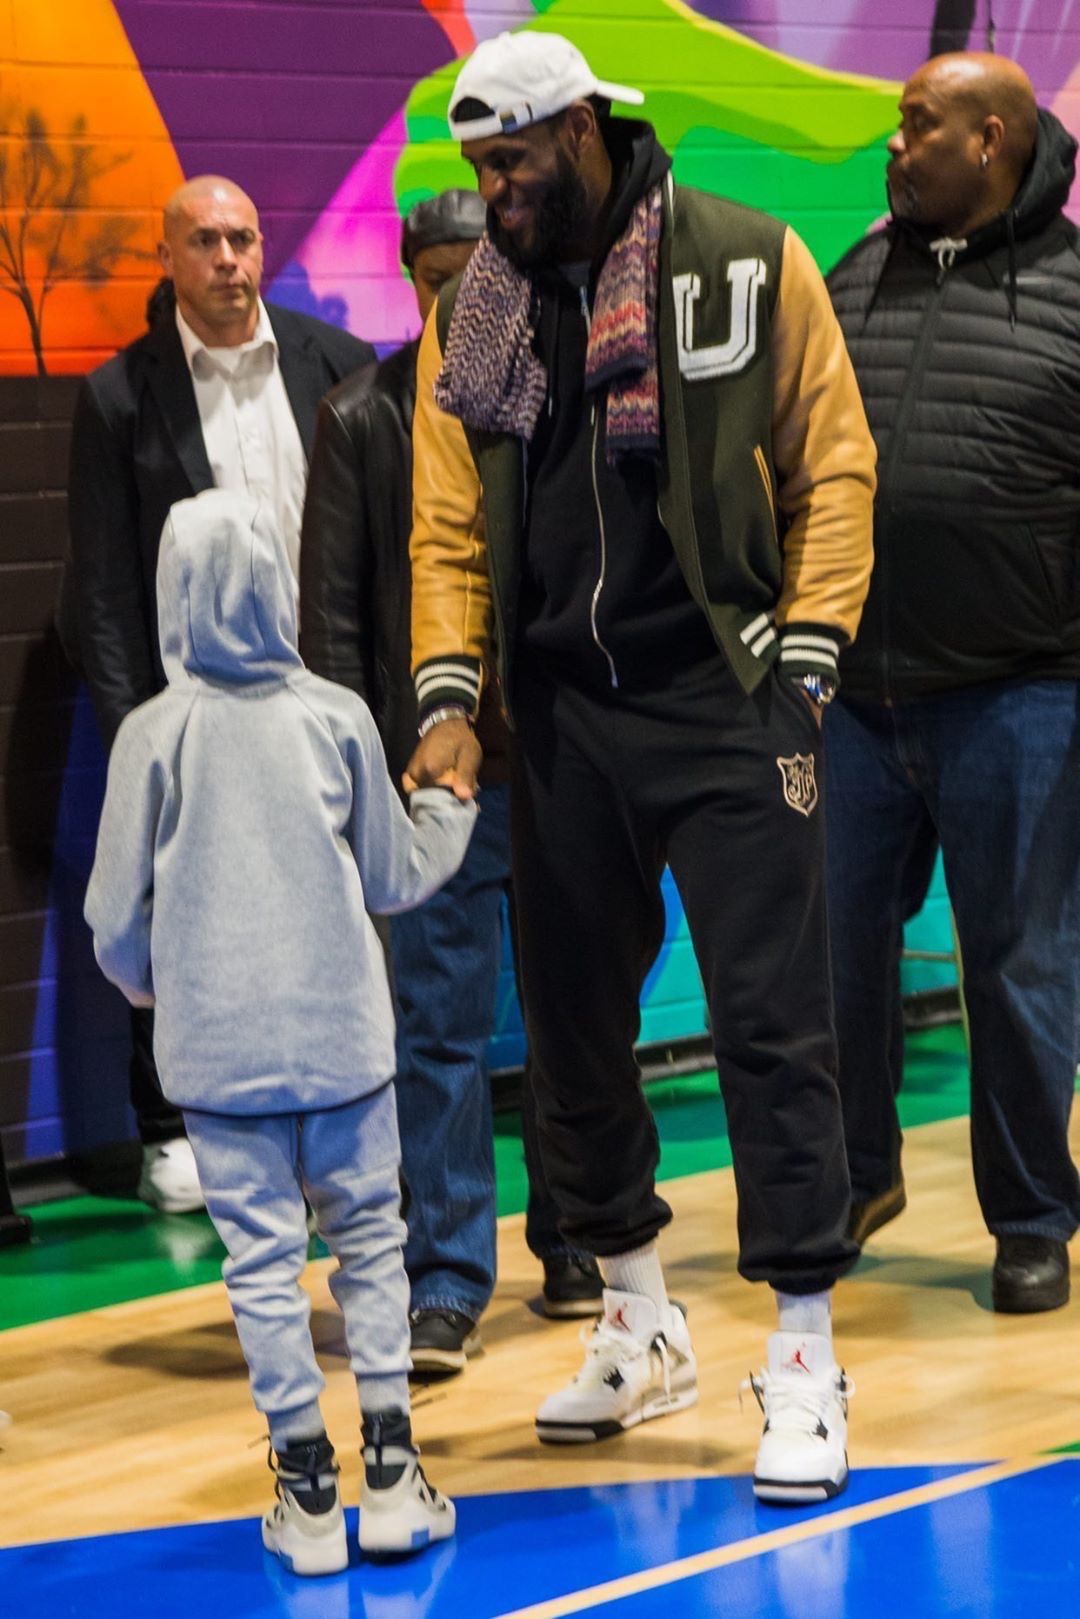 LeBron James Steps Out in Very Tight Sweatpants: Photo 3603260, LeBron  James Photos